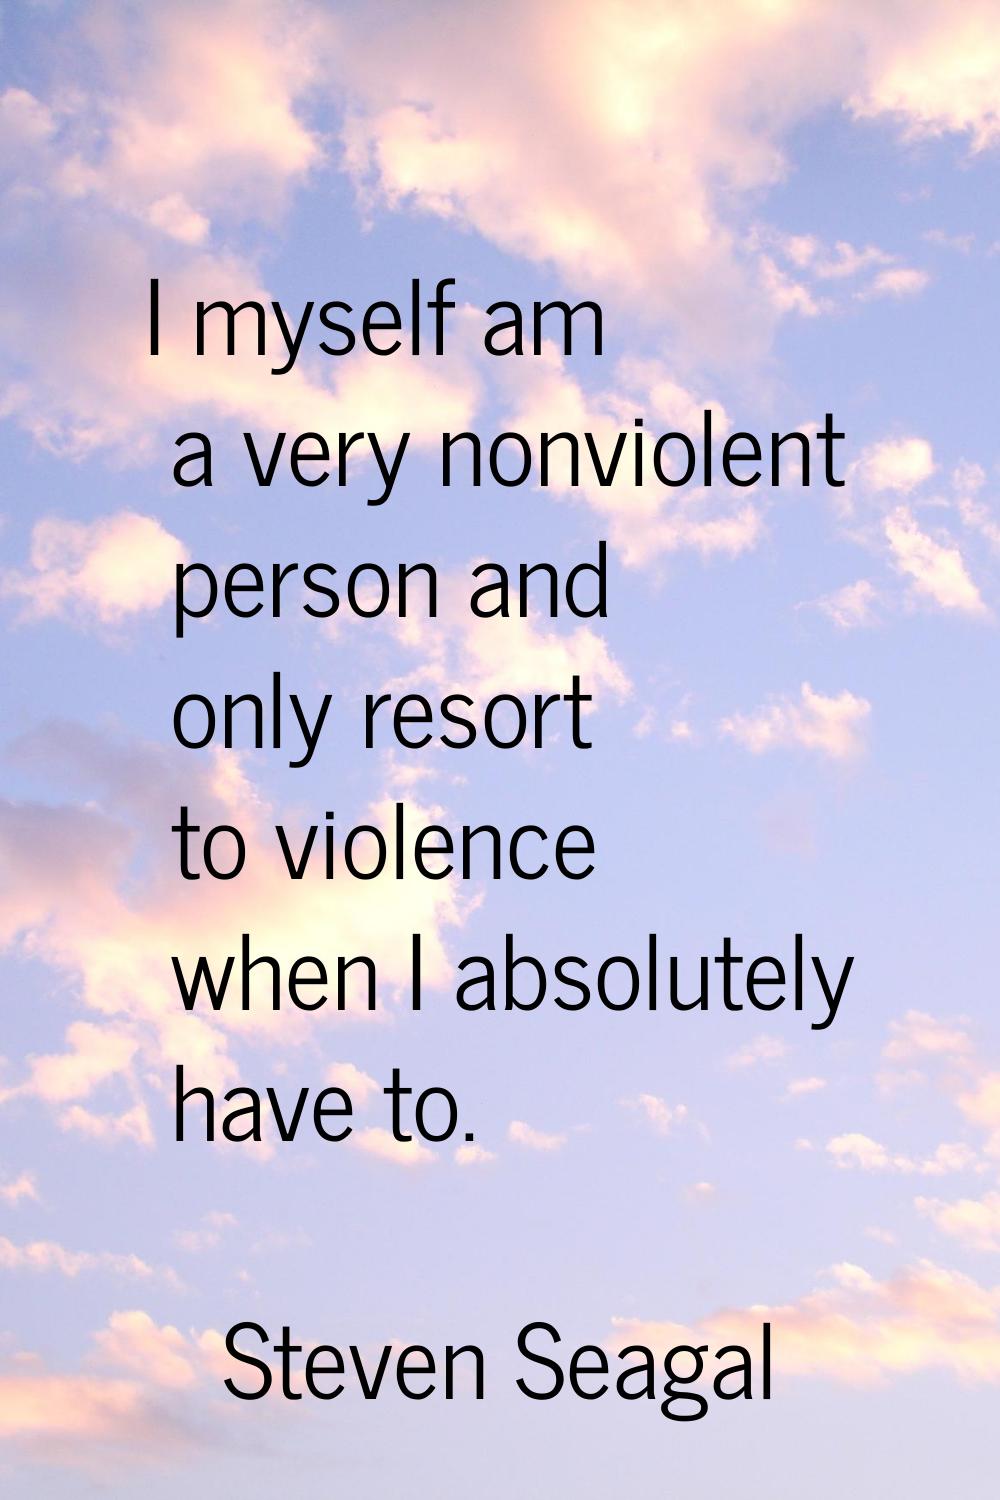 I myself am a very nonviolent person and only resort to violence when I absolutely have to.